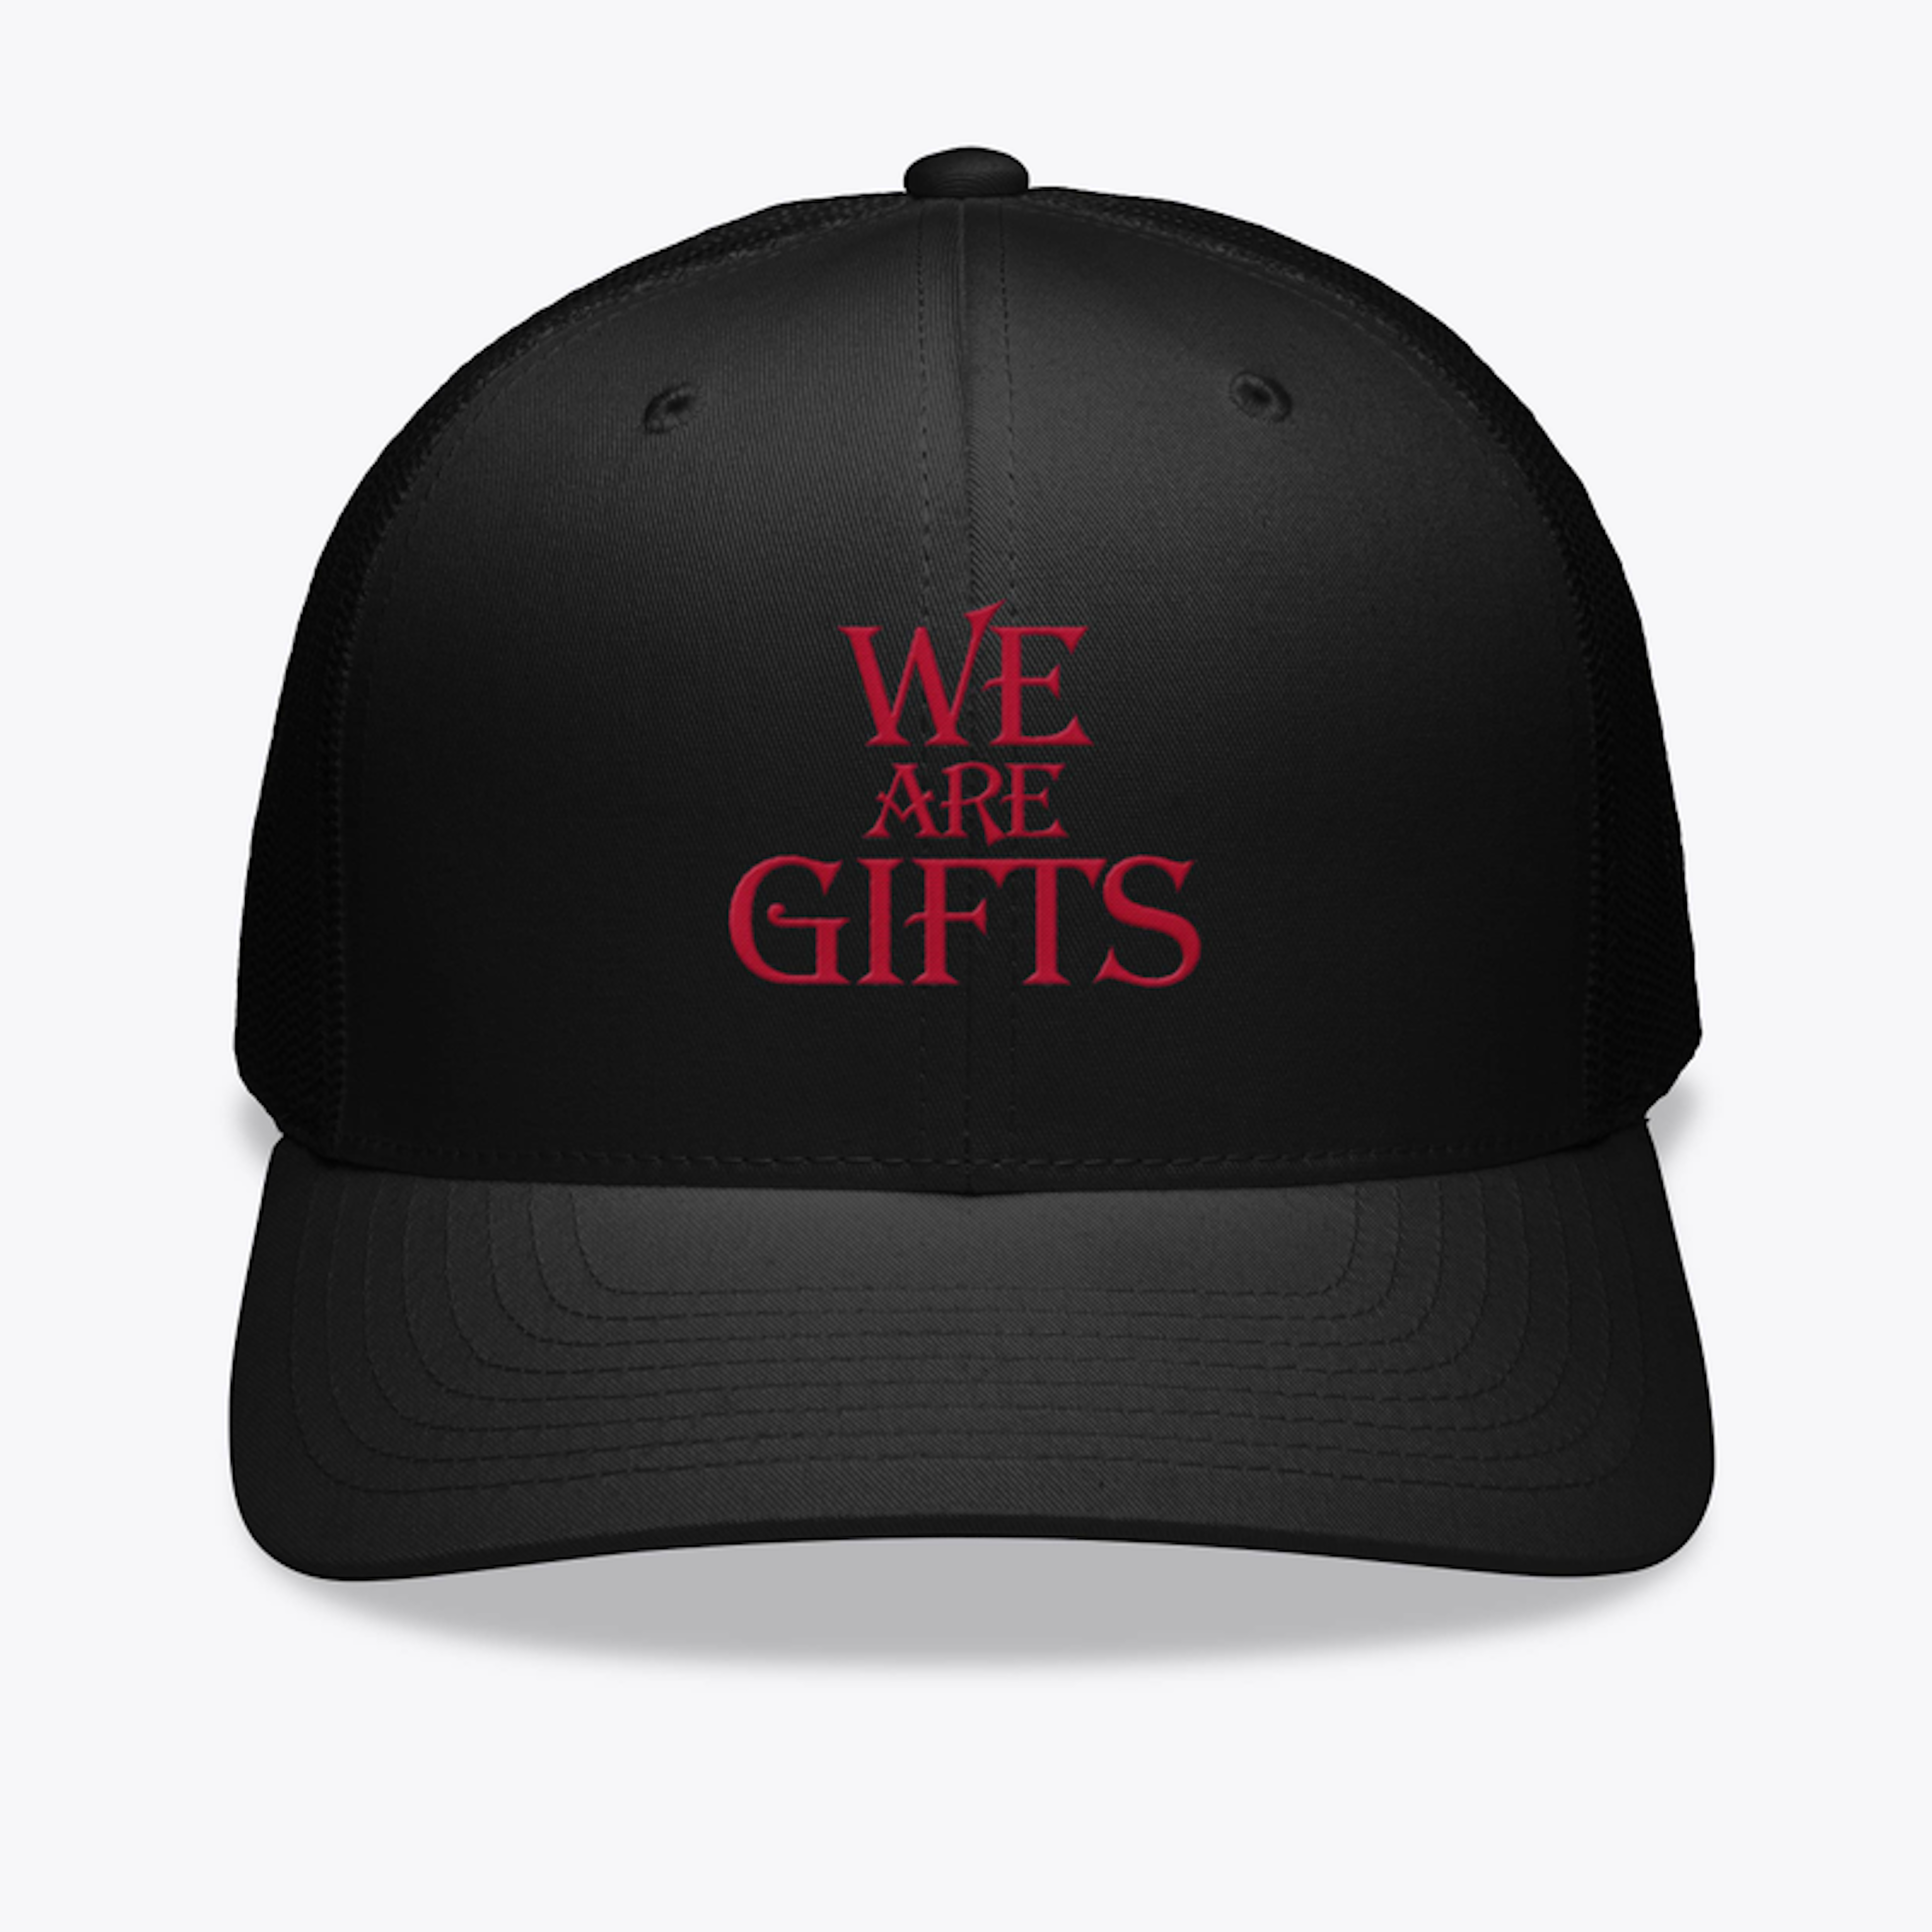 WE ARE GIFTS Emroidered Trucker Cap